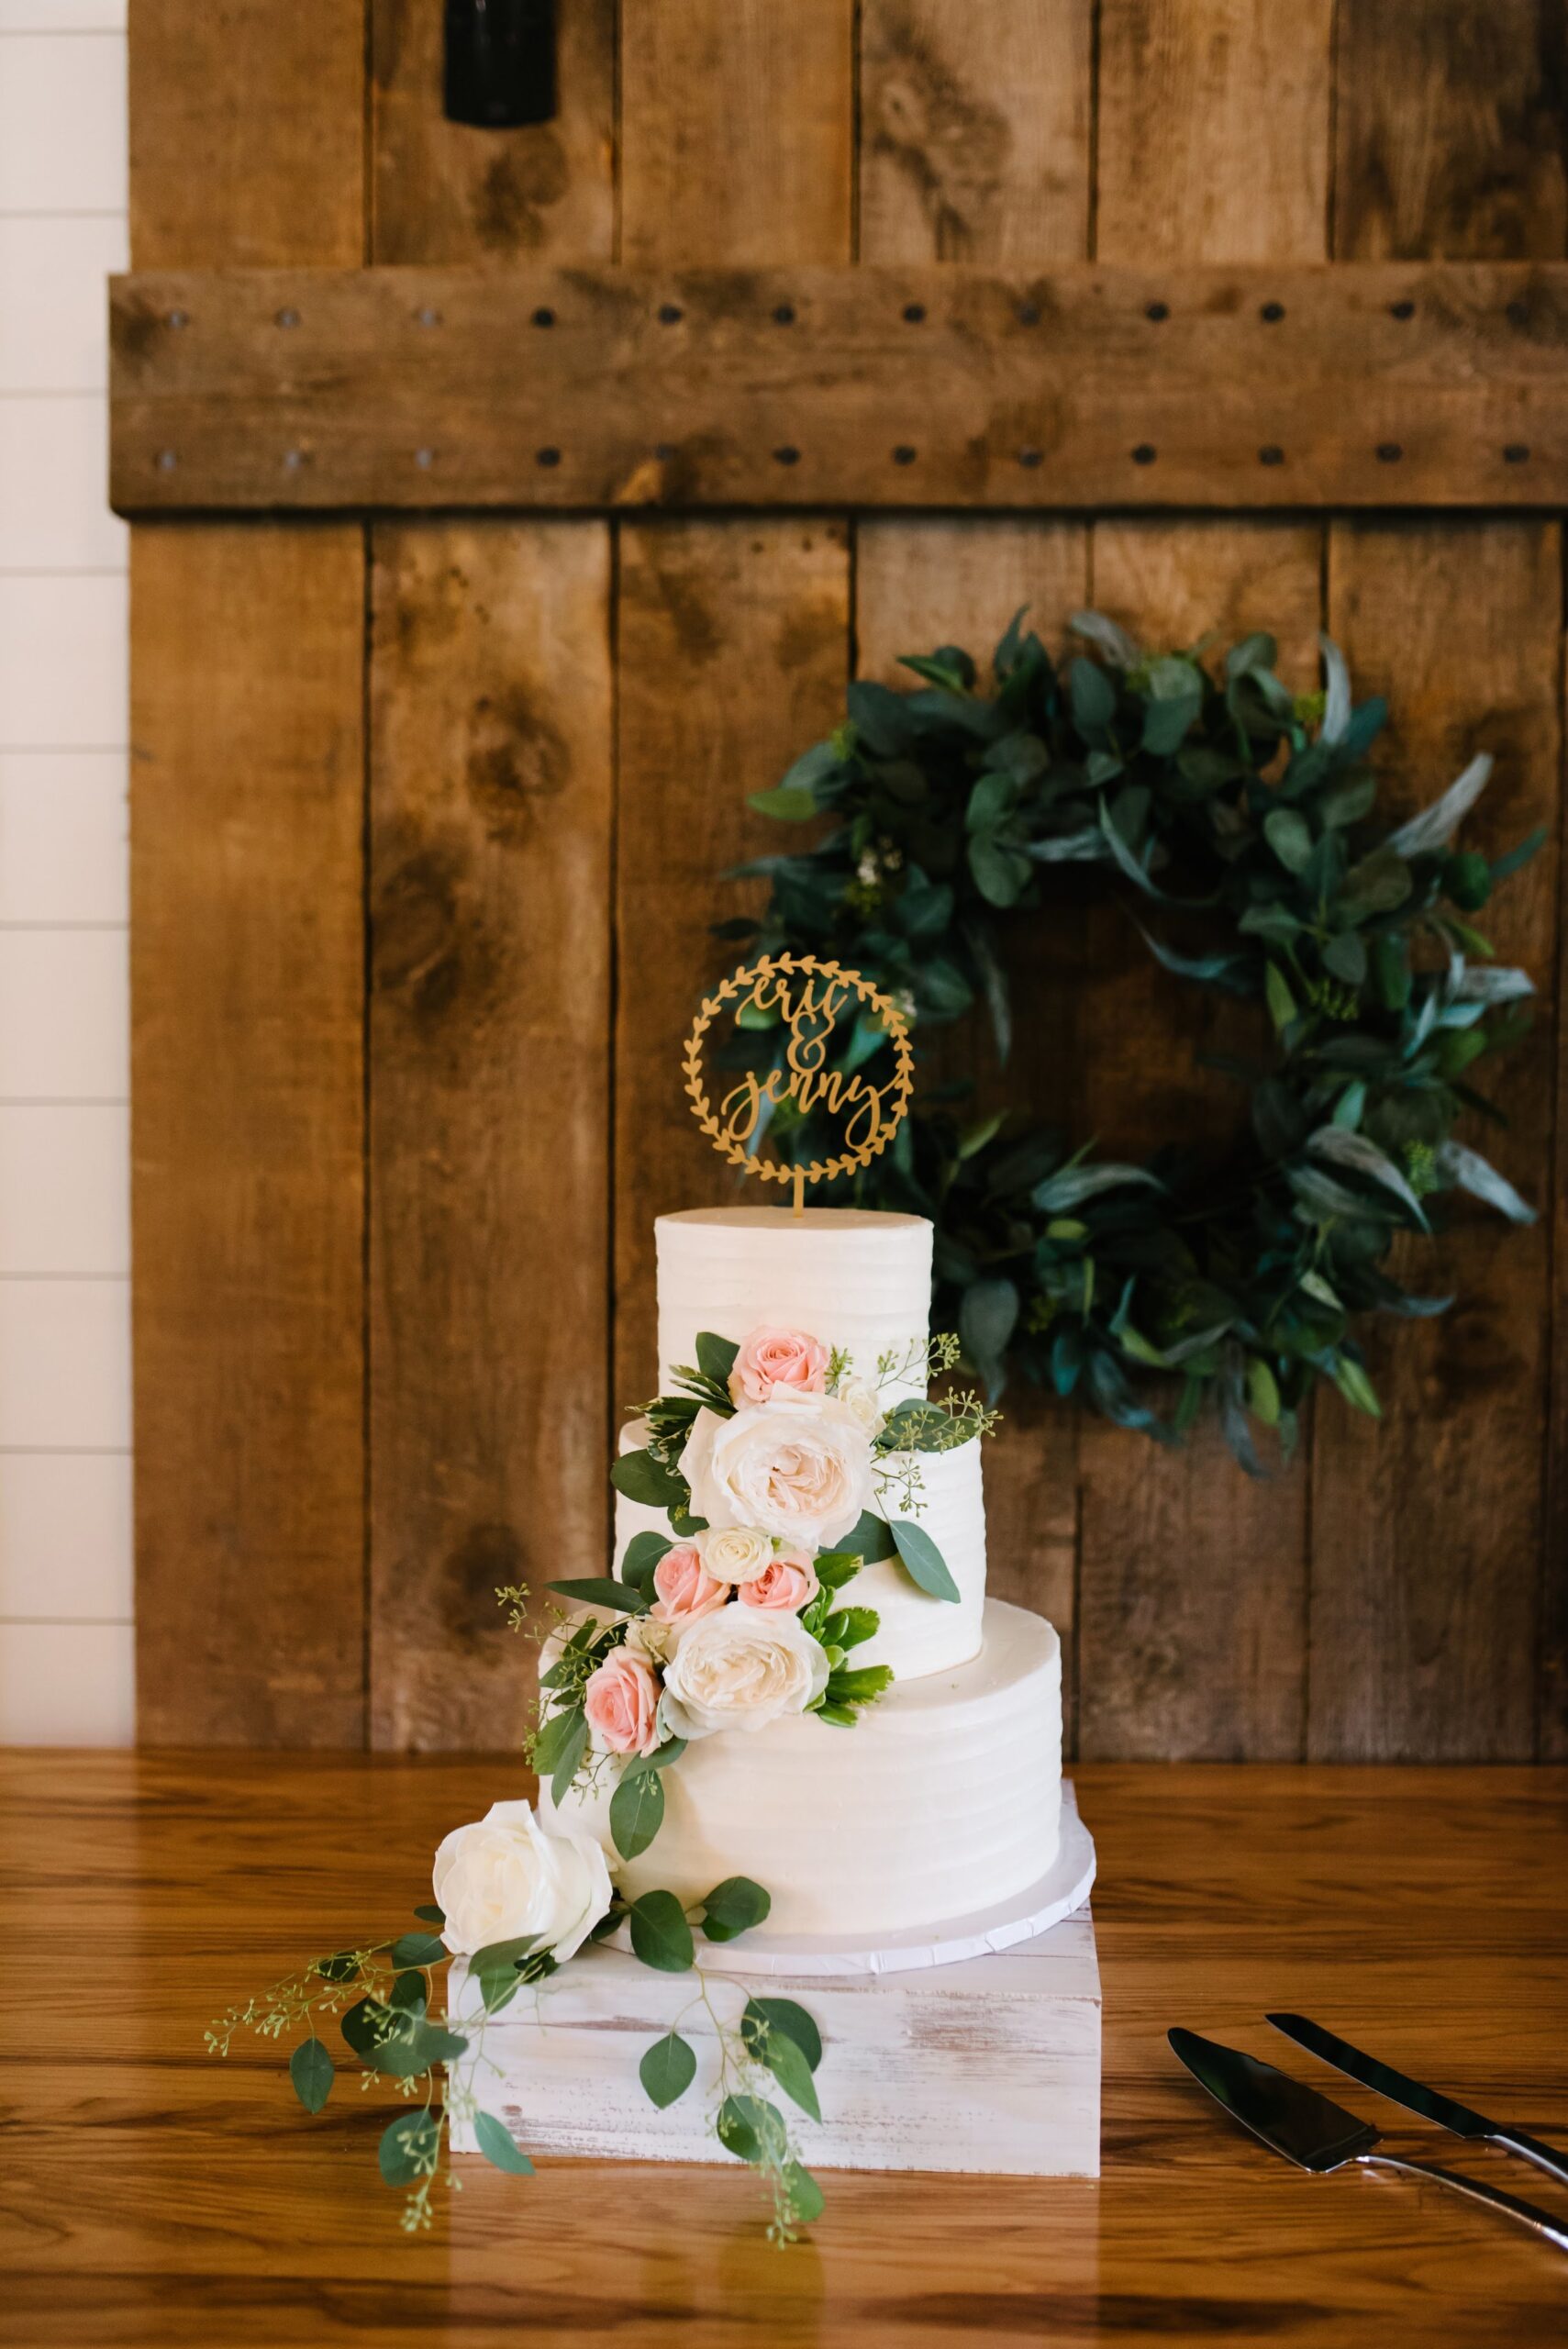 Clean and simple cake with just the right floral embellishments to make their wedding look.